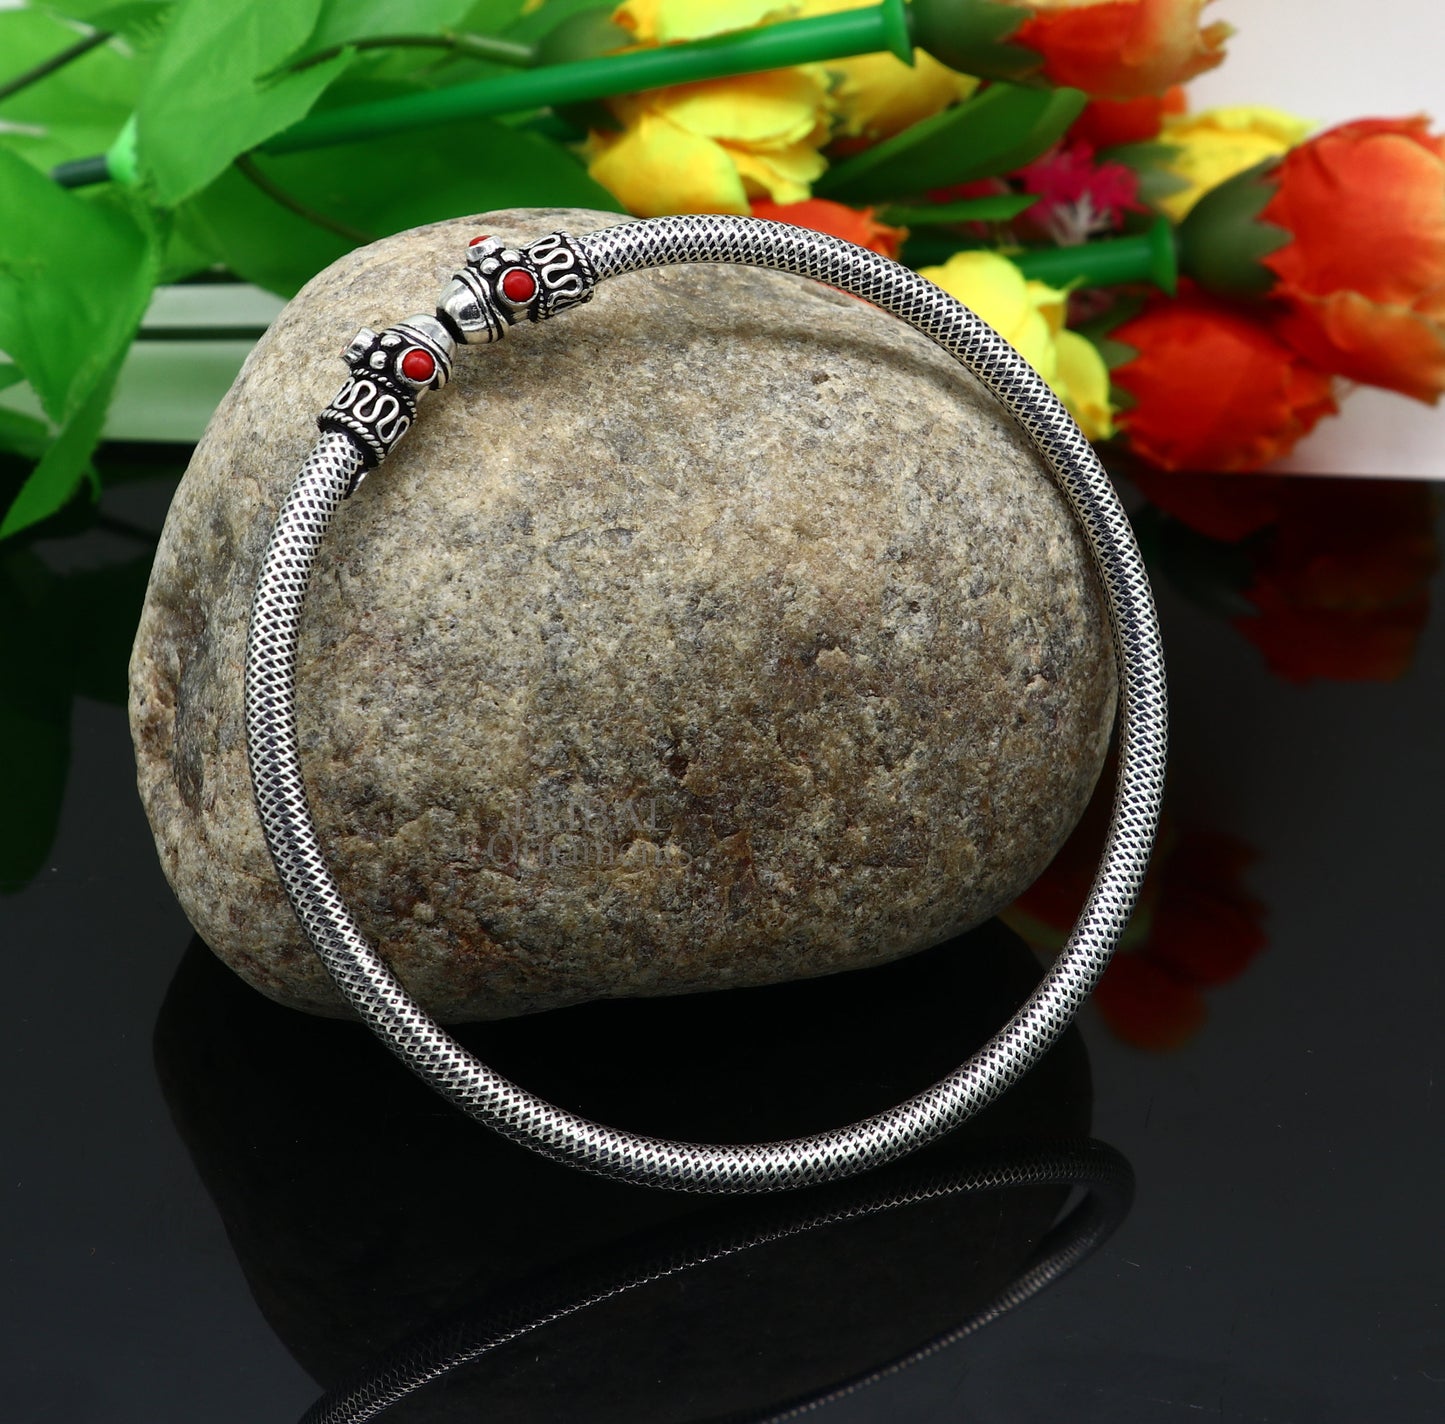 925 sterling silver handmade vintage design stunning foot bracelet ankle kada excellent coral stone belly dance ethnic jewelry Rnsfk44 - TRIBAL ORNAMENTS